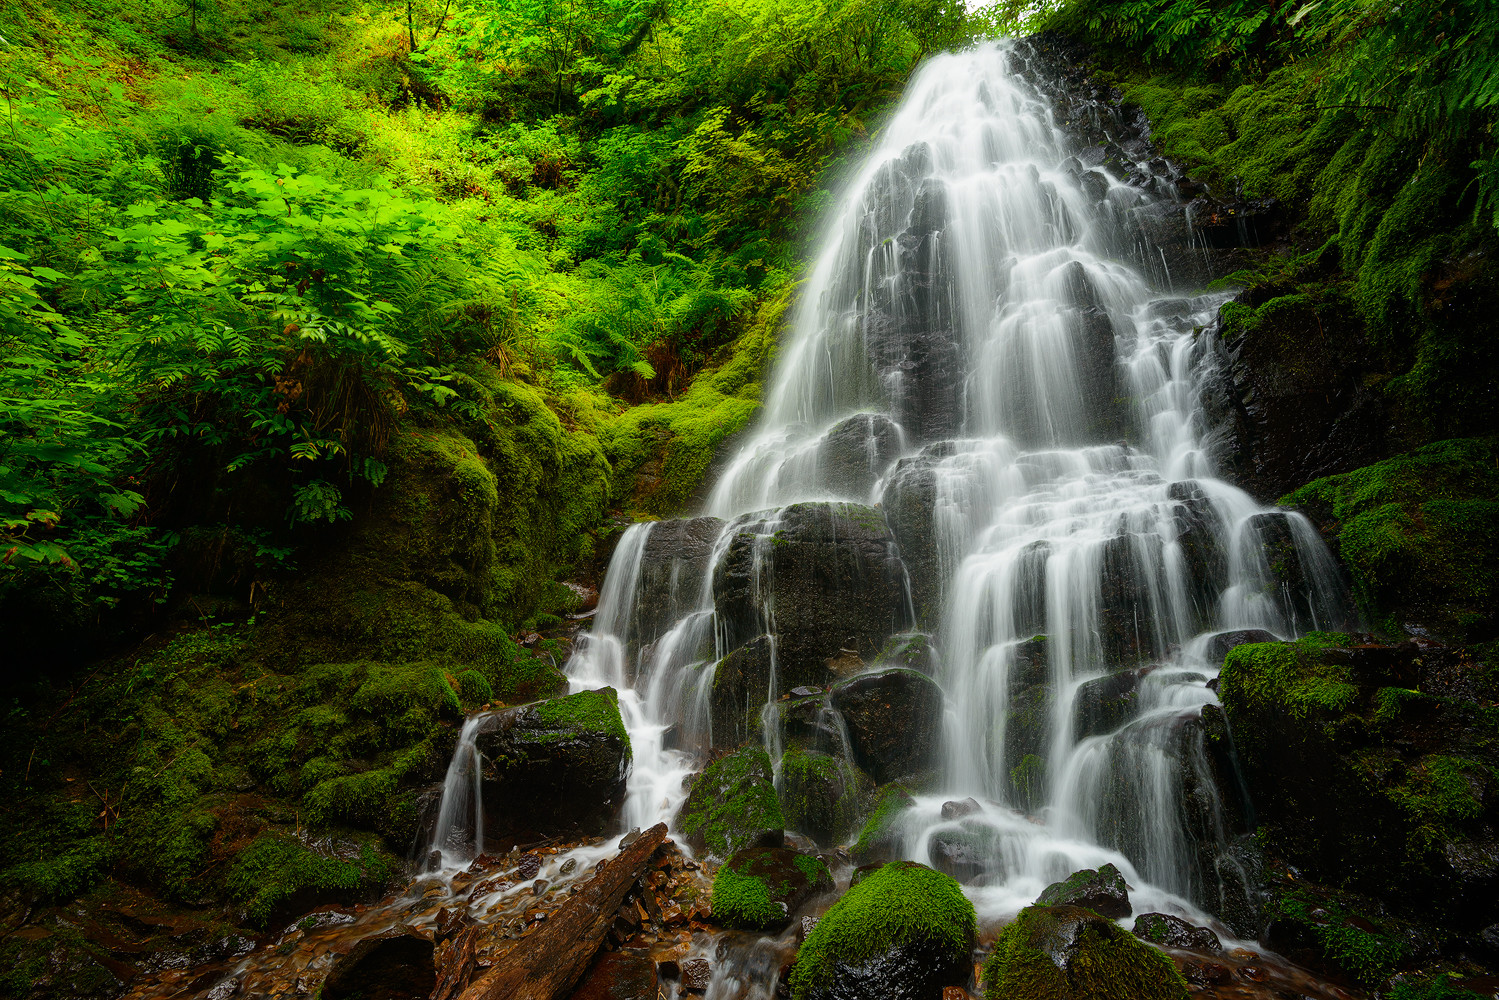 Tutorial: Learn How to Capture Beautiful Waterfall Photos